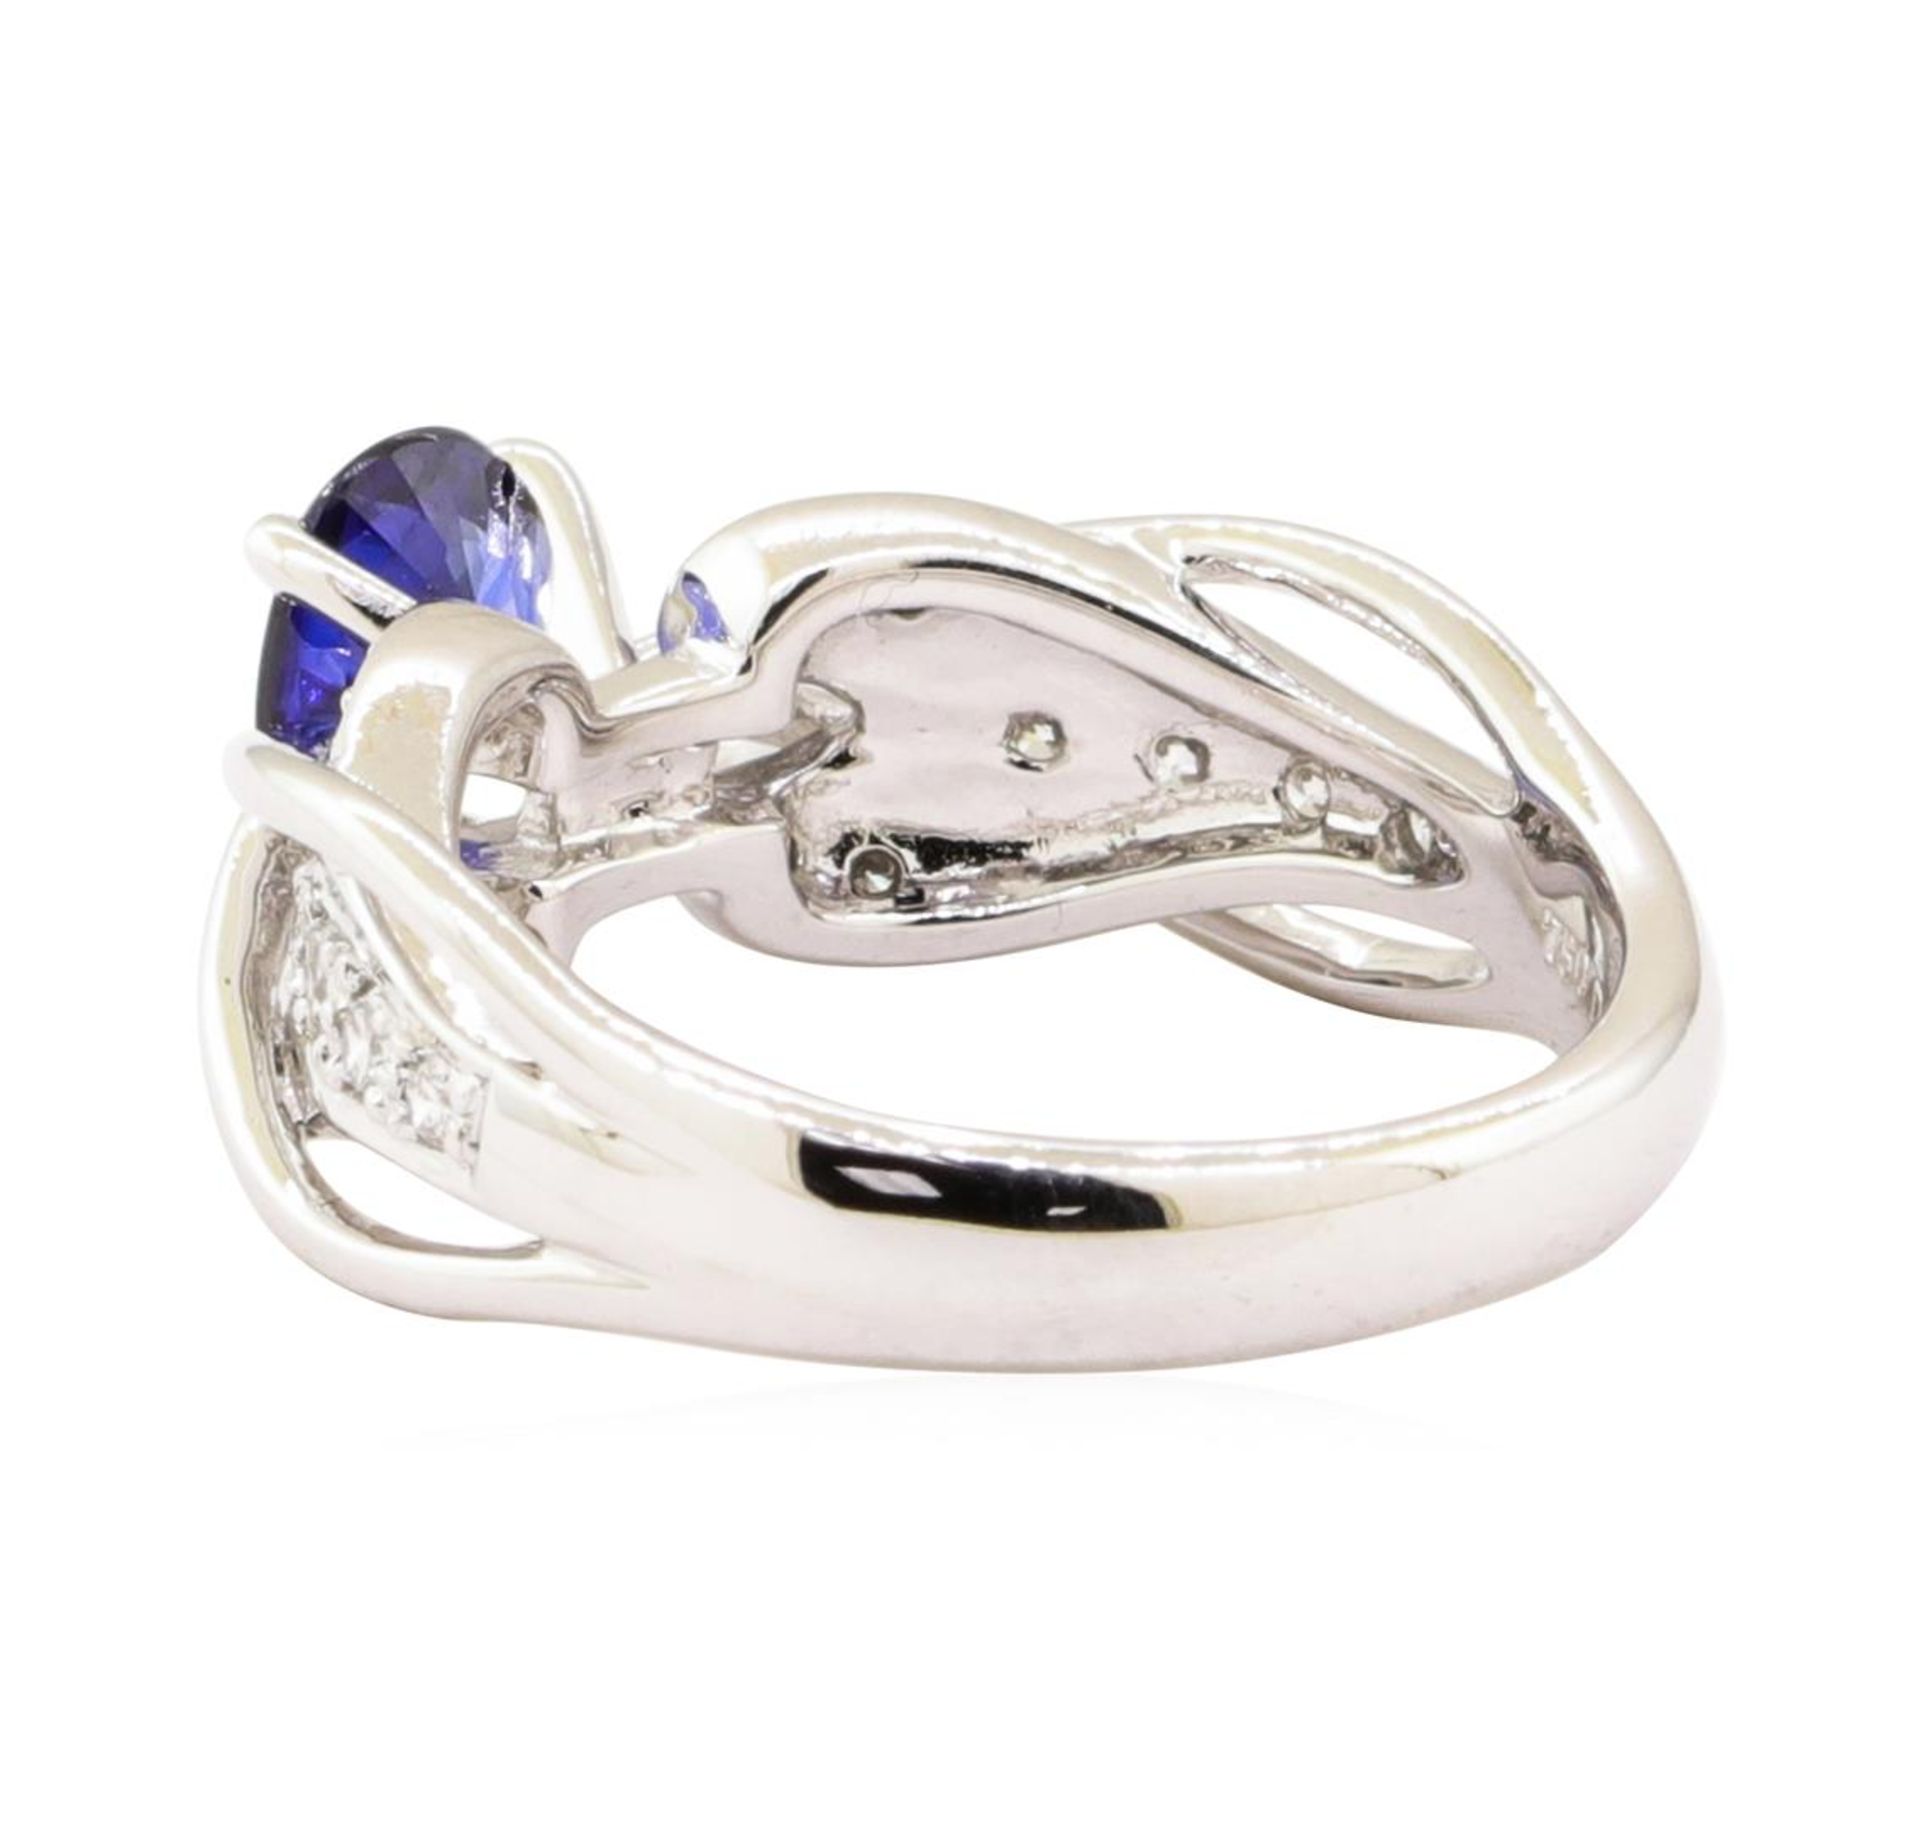 1.10 ctw Blue Sapphire And Diamond Ring - 18KT White Gold - Image 3 of 5